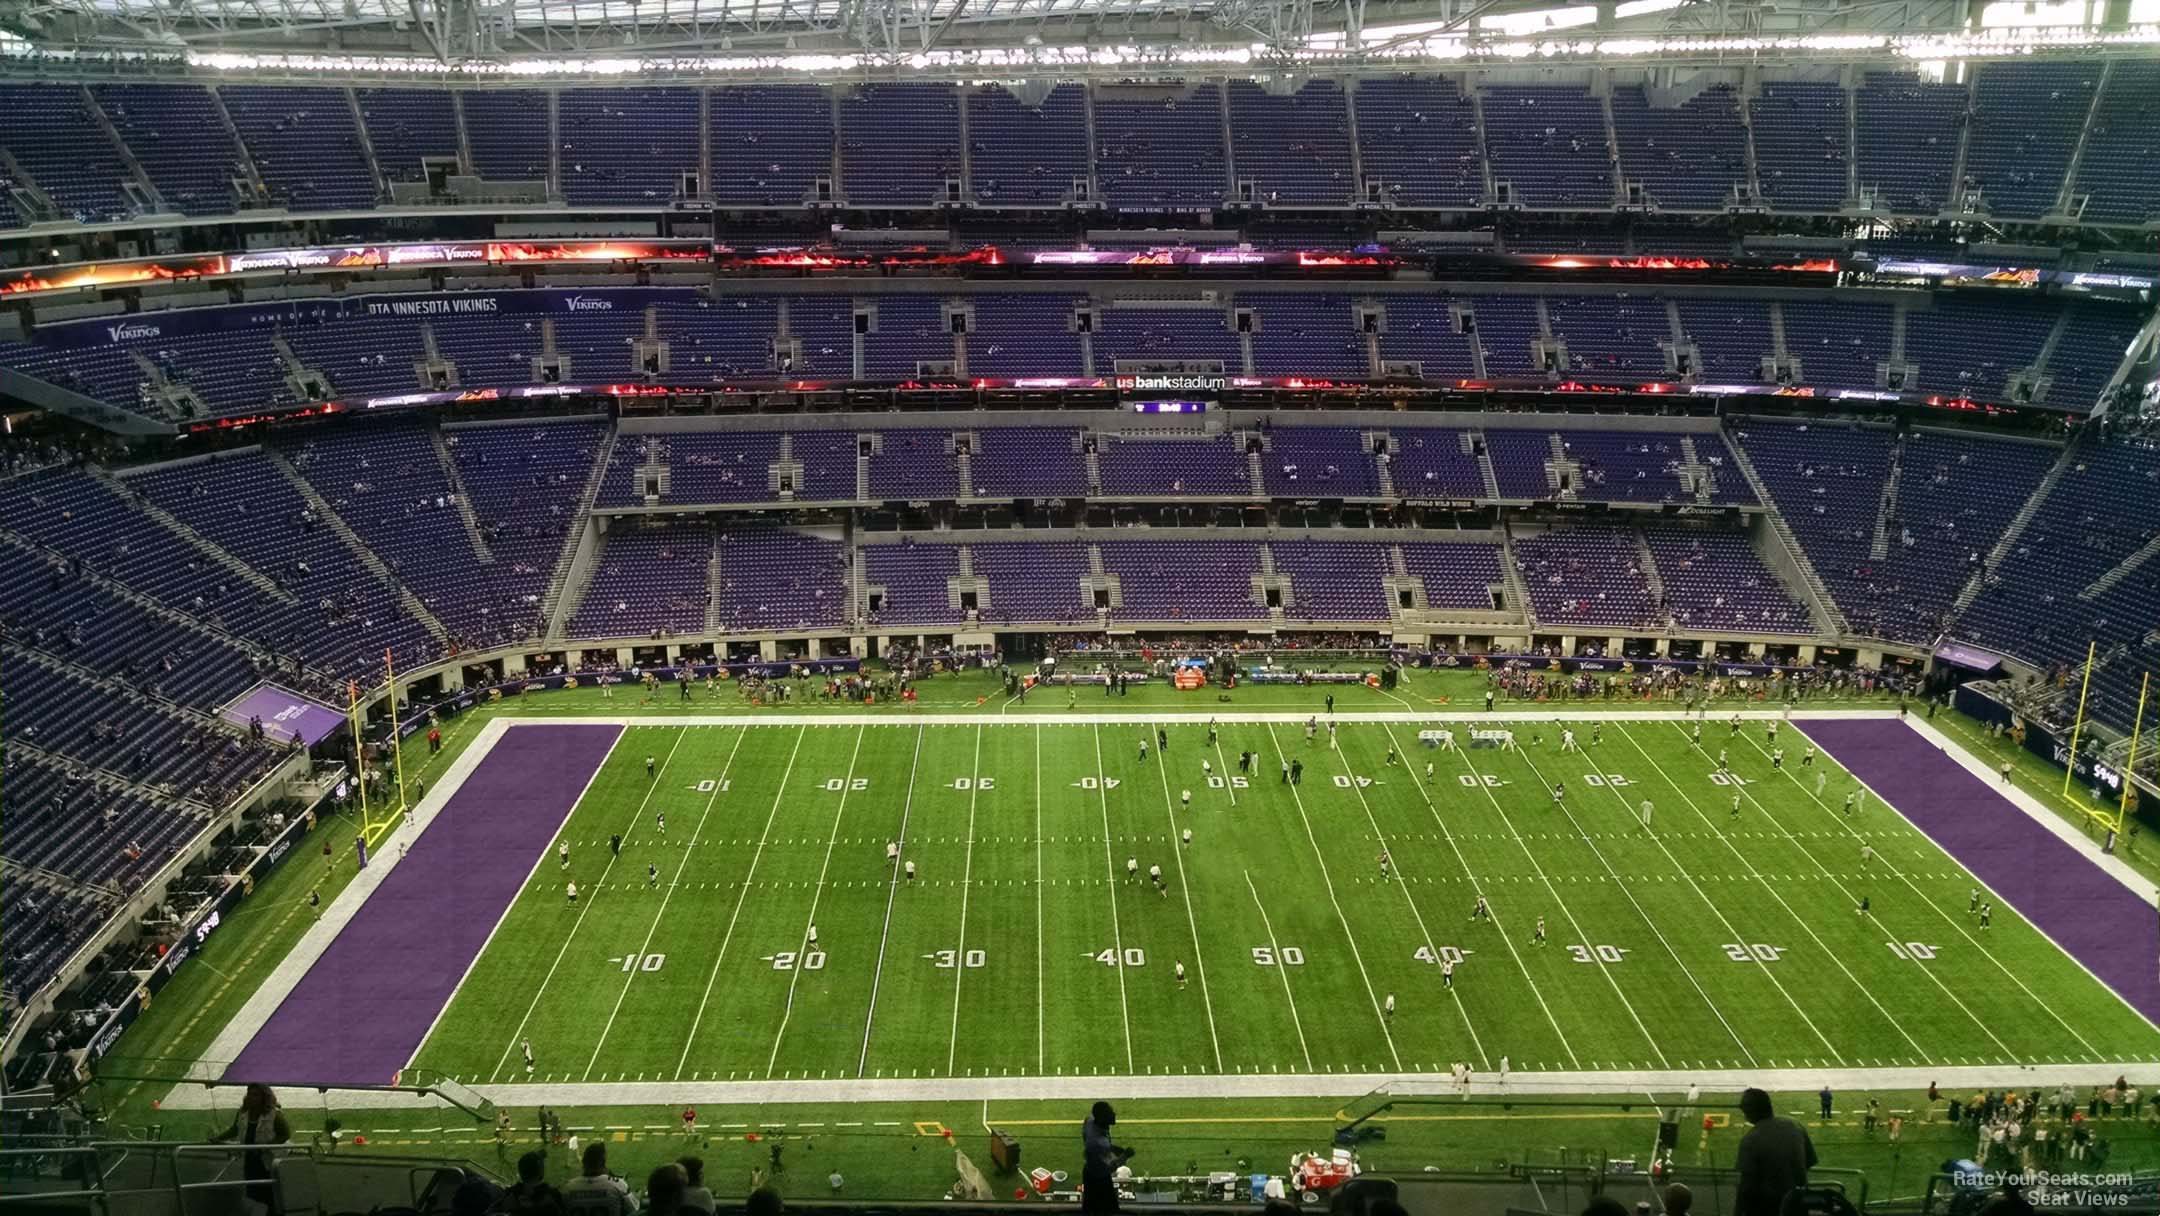 section 313, row 15 seat view  for football - u.s. bank stadium